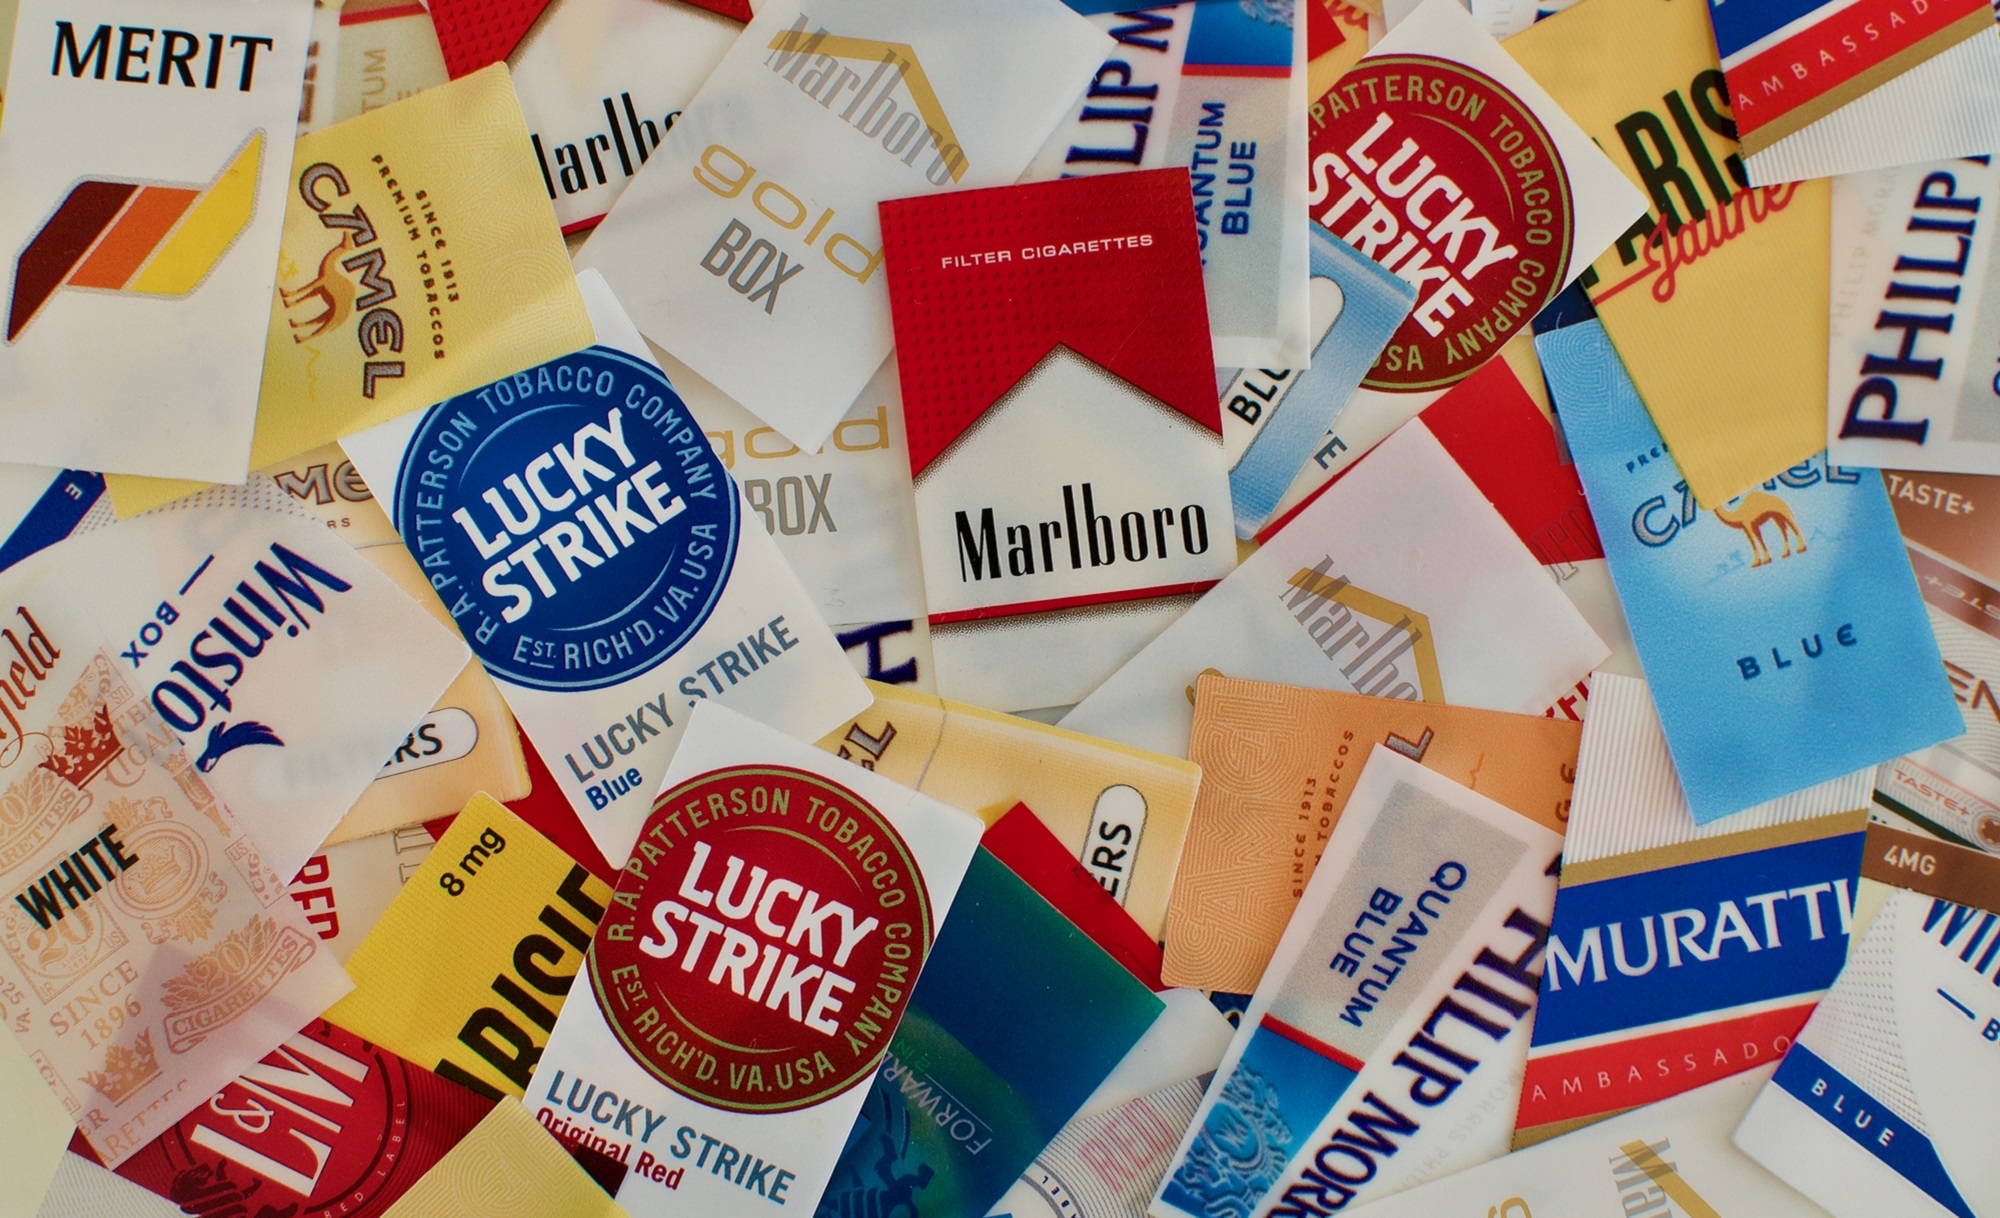 Discarded cigarette labels like Marlboro and Lucky Strike to depict declining smoking rates in the US